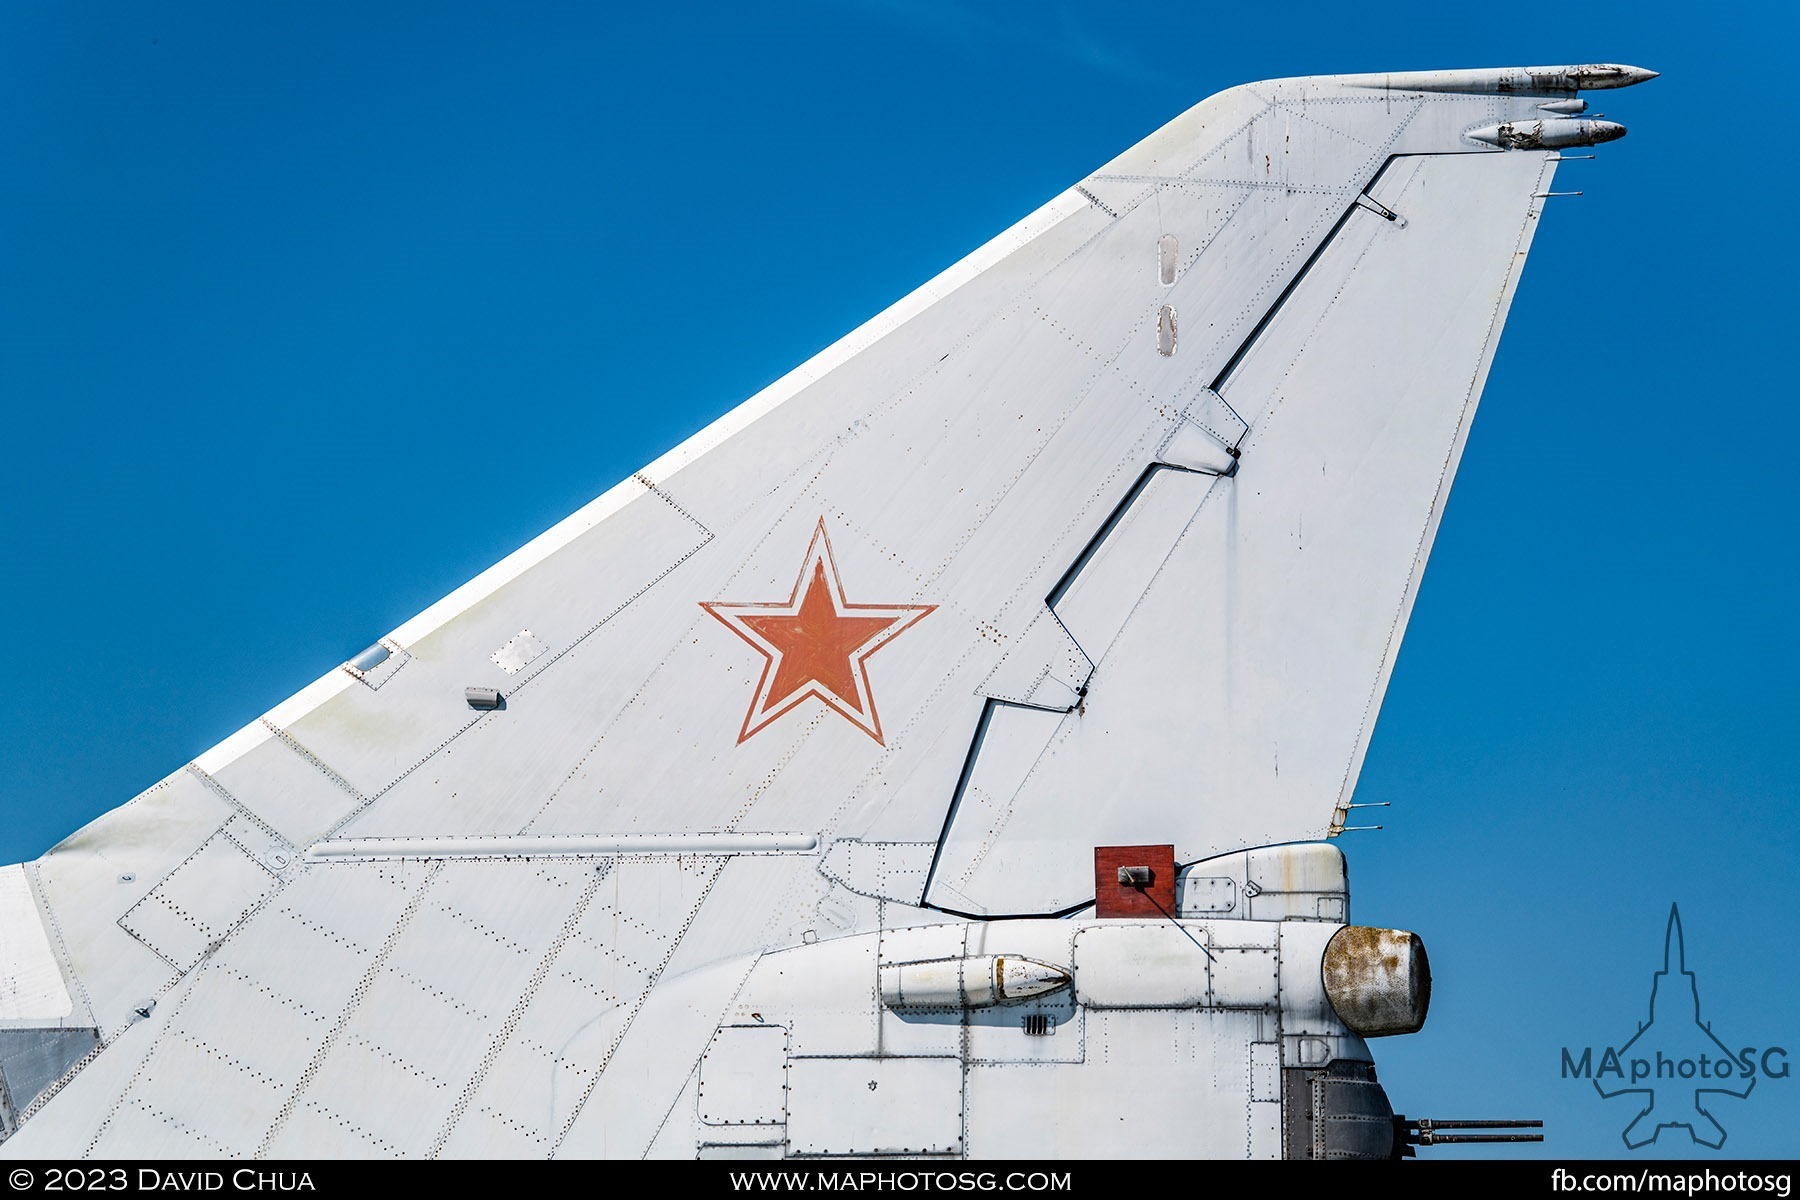 Tail of the Tupolev Tu-22M